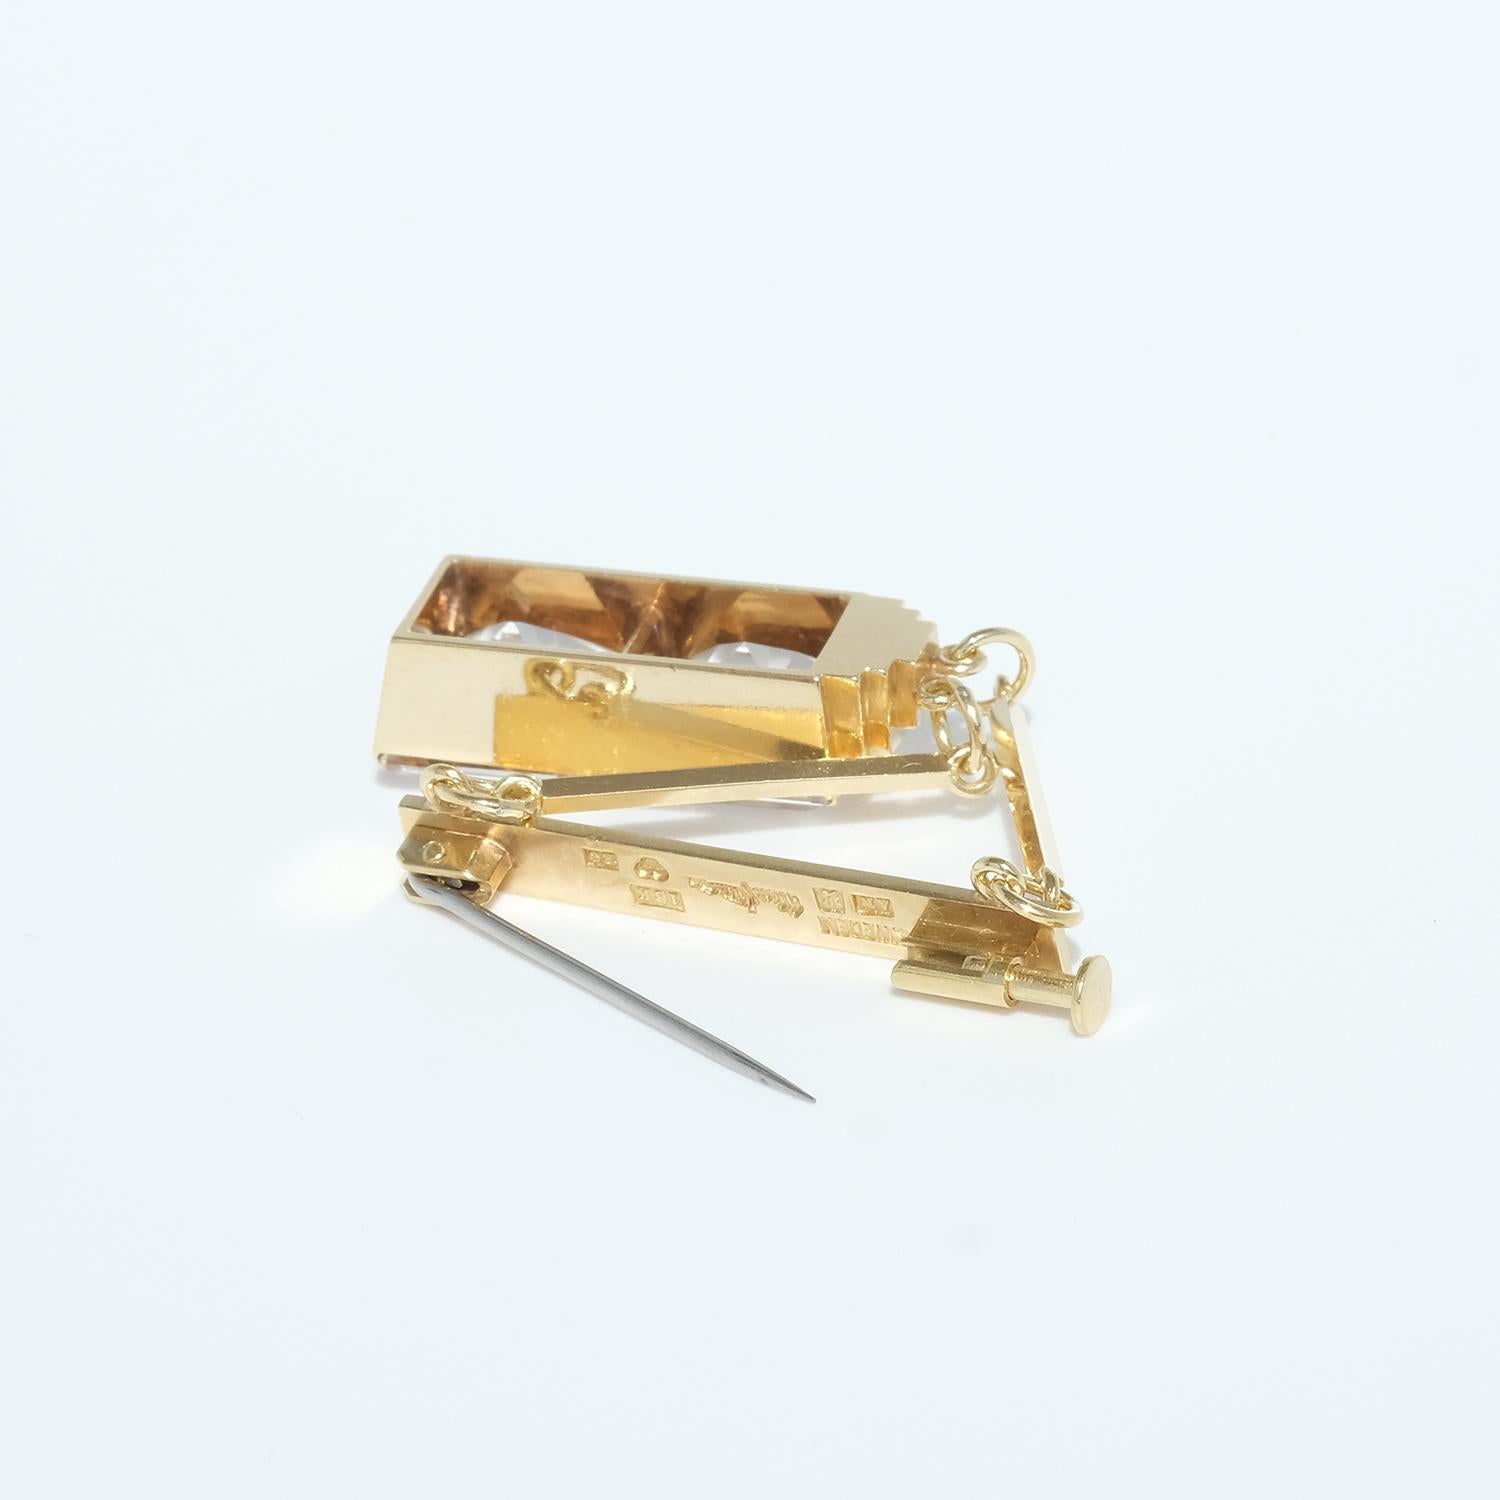 Square Cut Brooch, 18k Gold with a Rock Crystal, Made 1944 by Wiwen Nilsson, Sweden For Sale